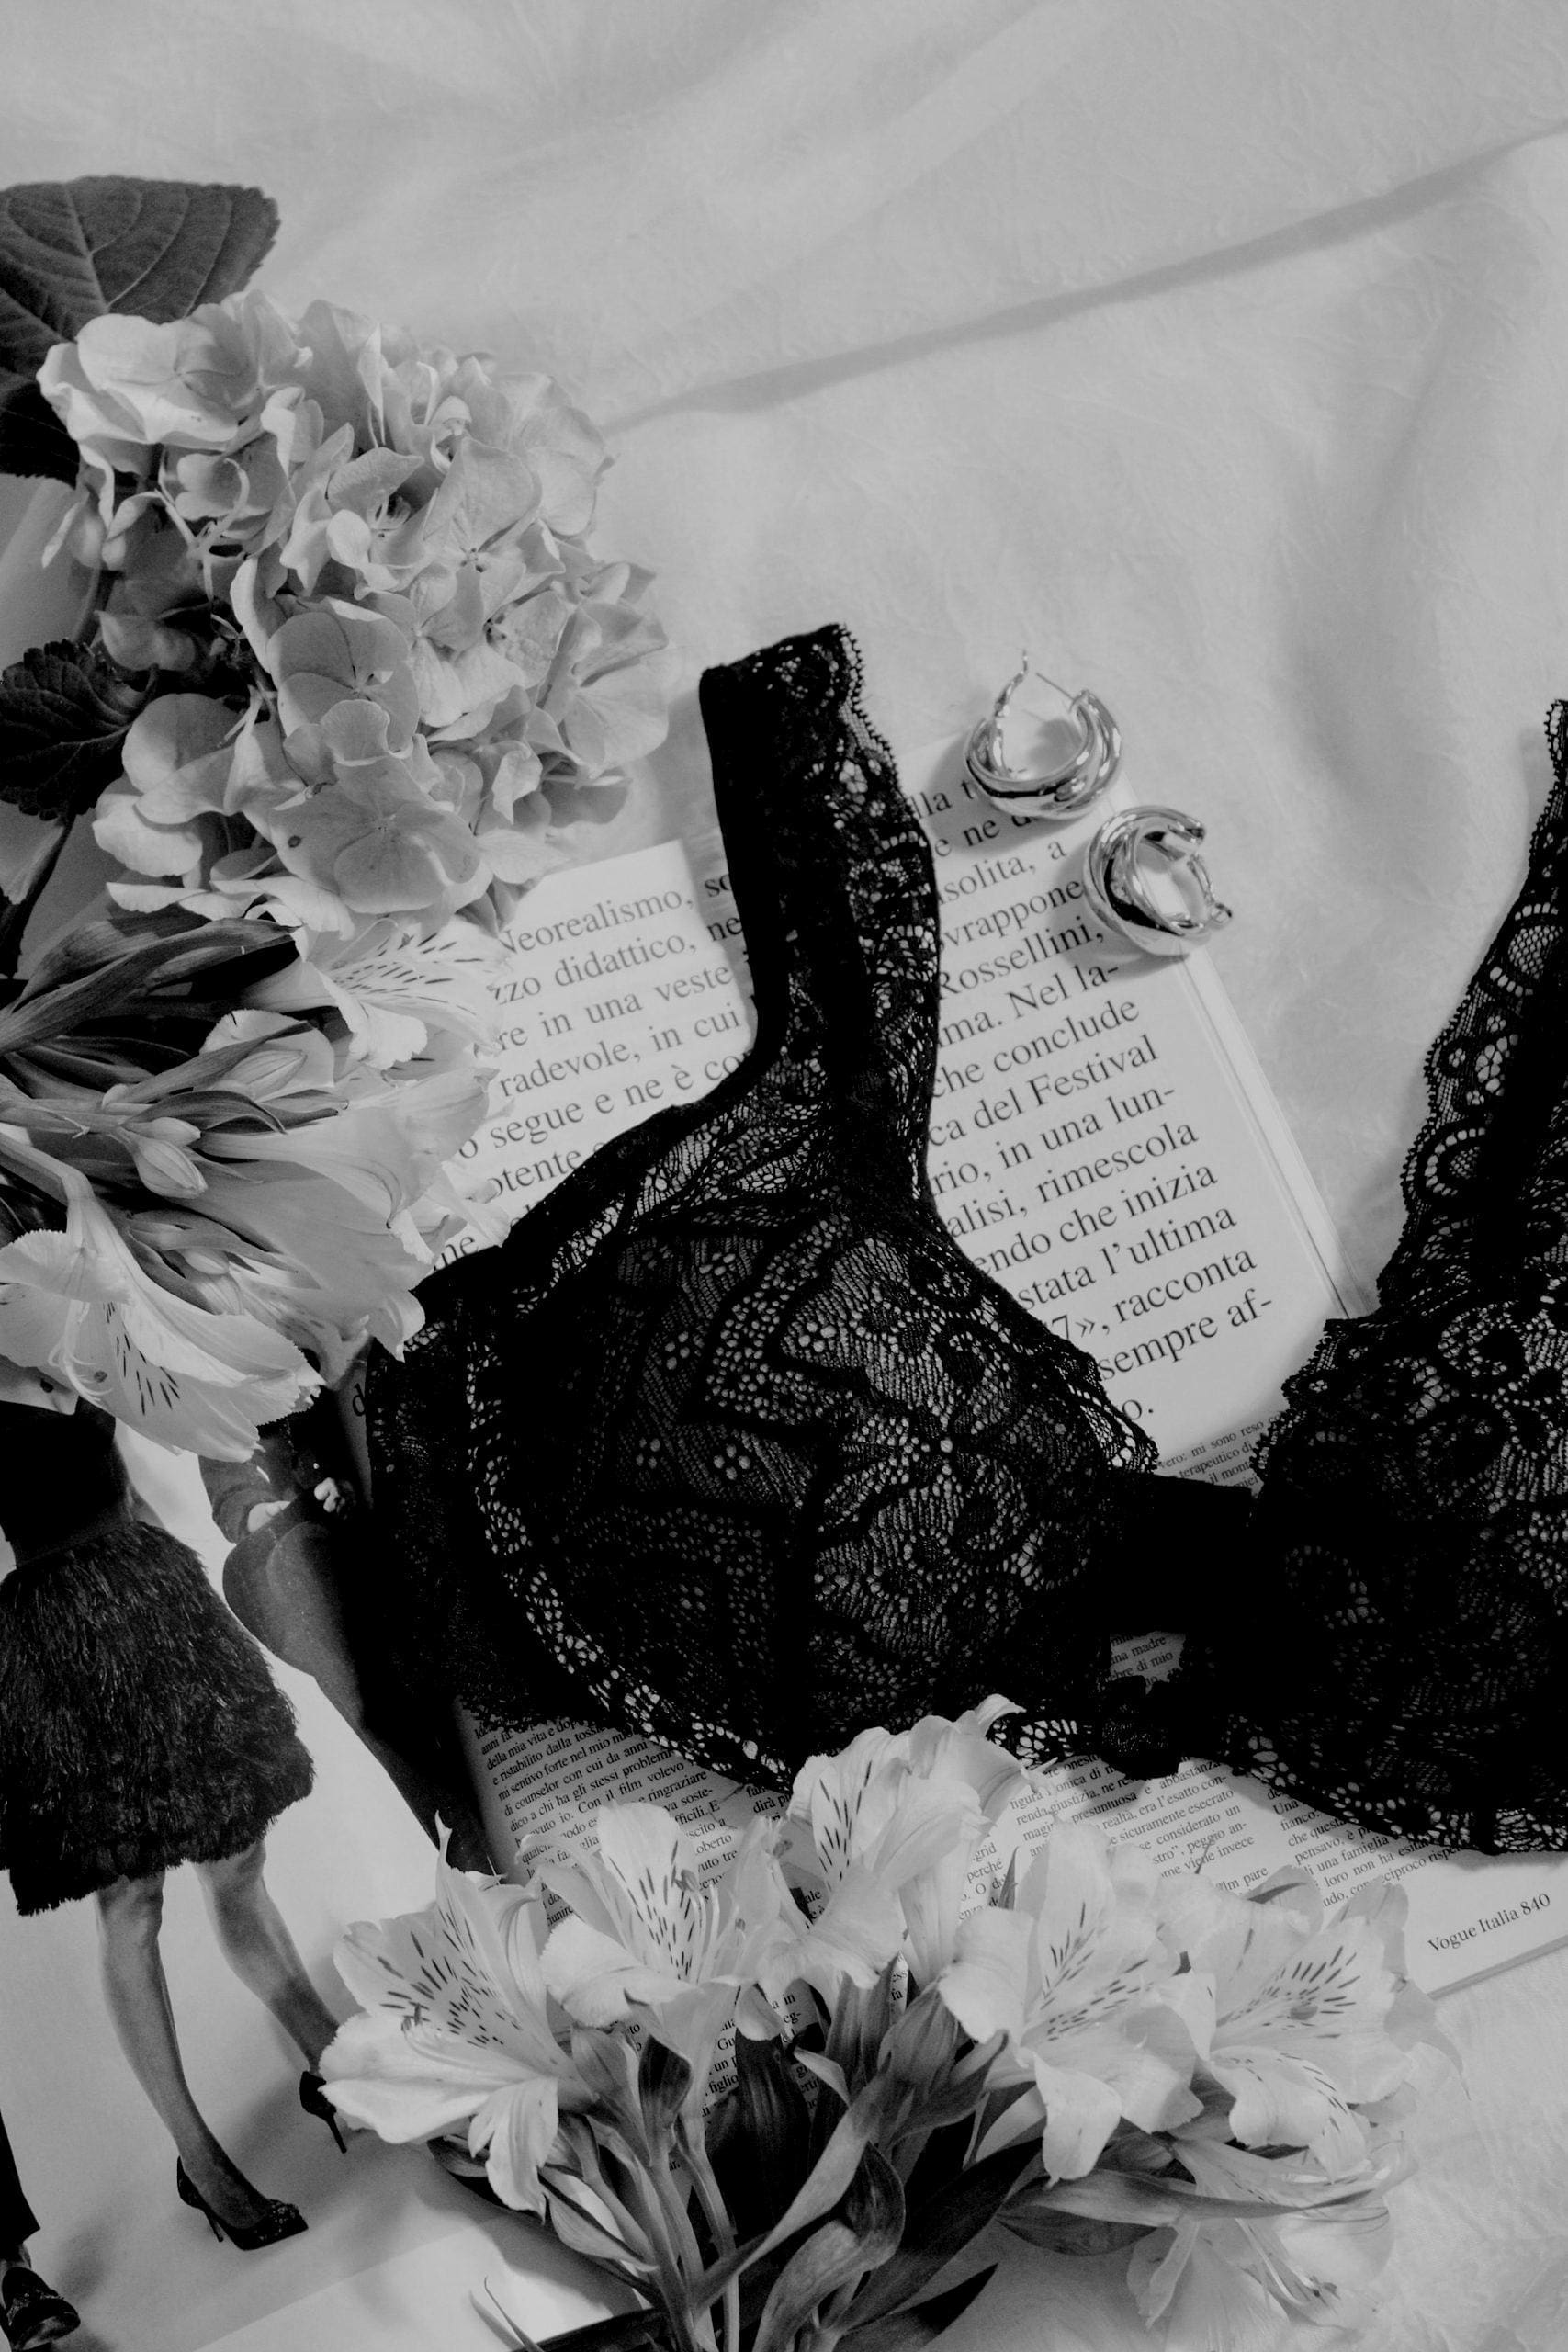 How to Shop for Lingerie - A Beginners Guide